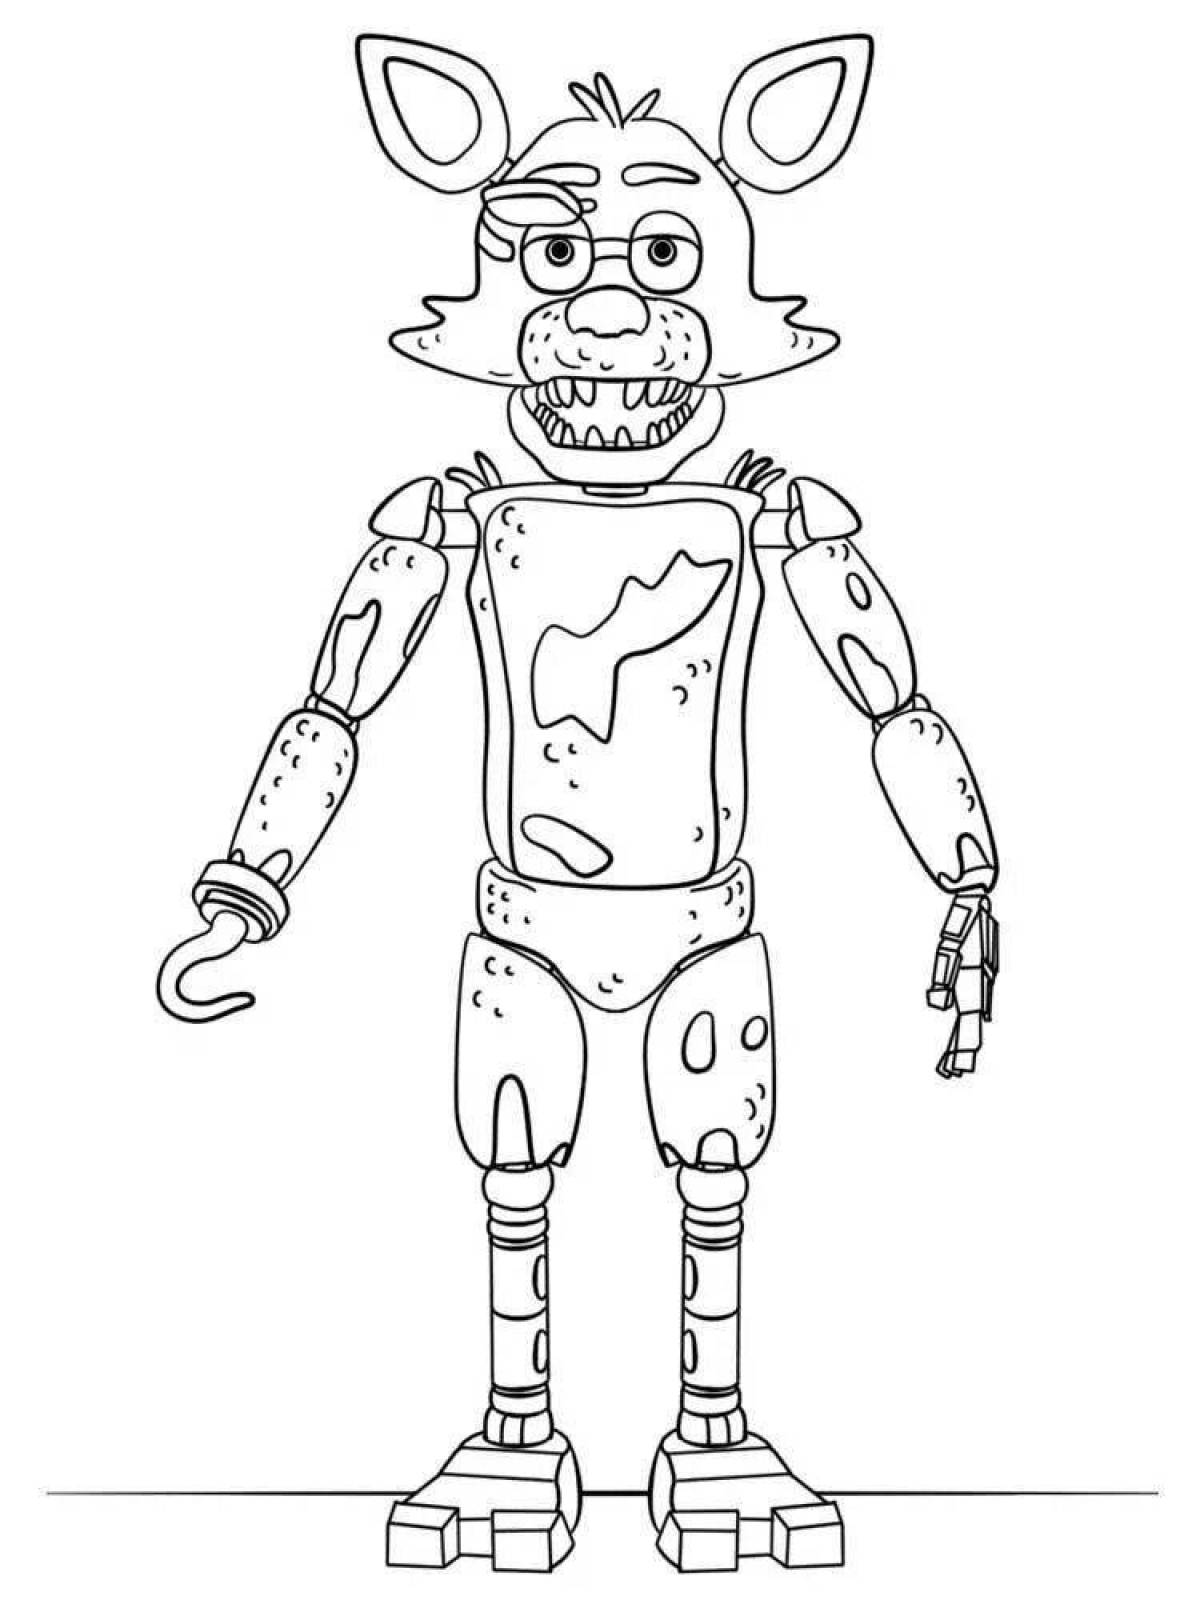 Animated fnaf 3 coloring book